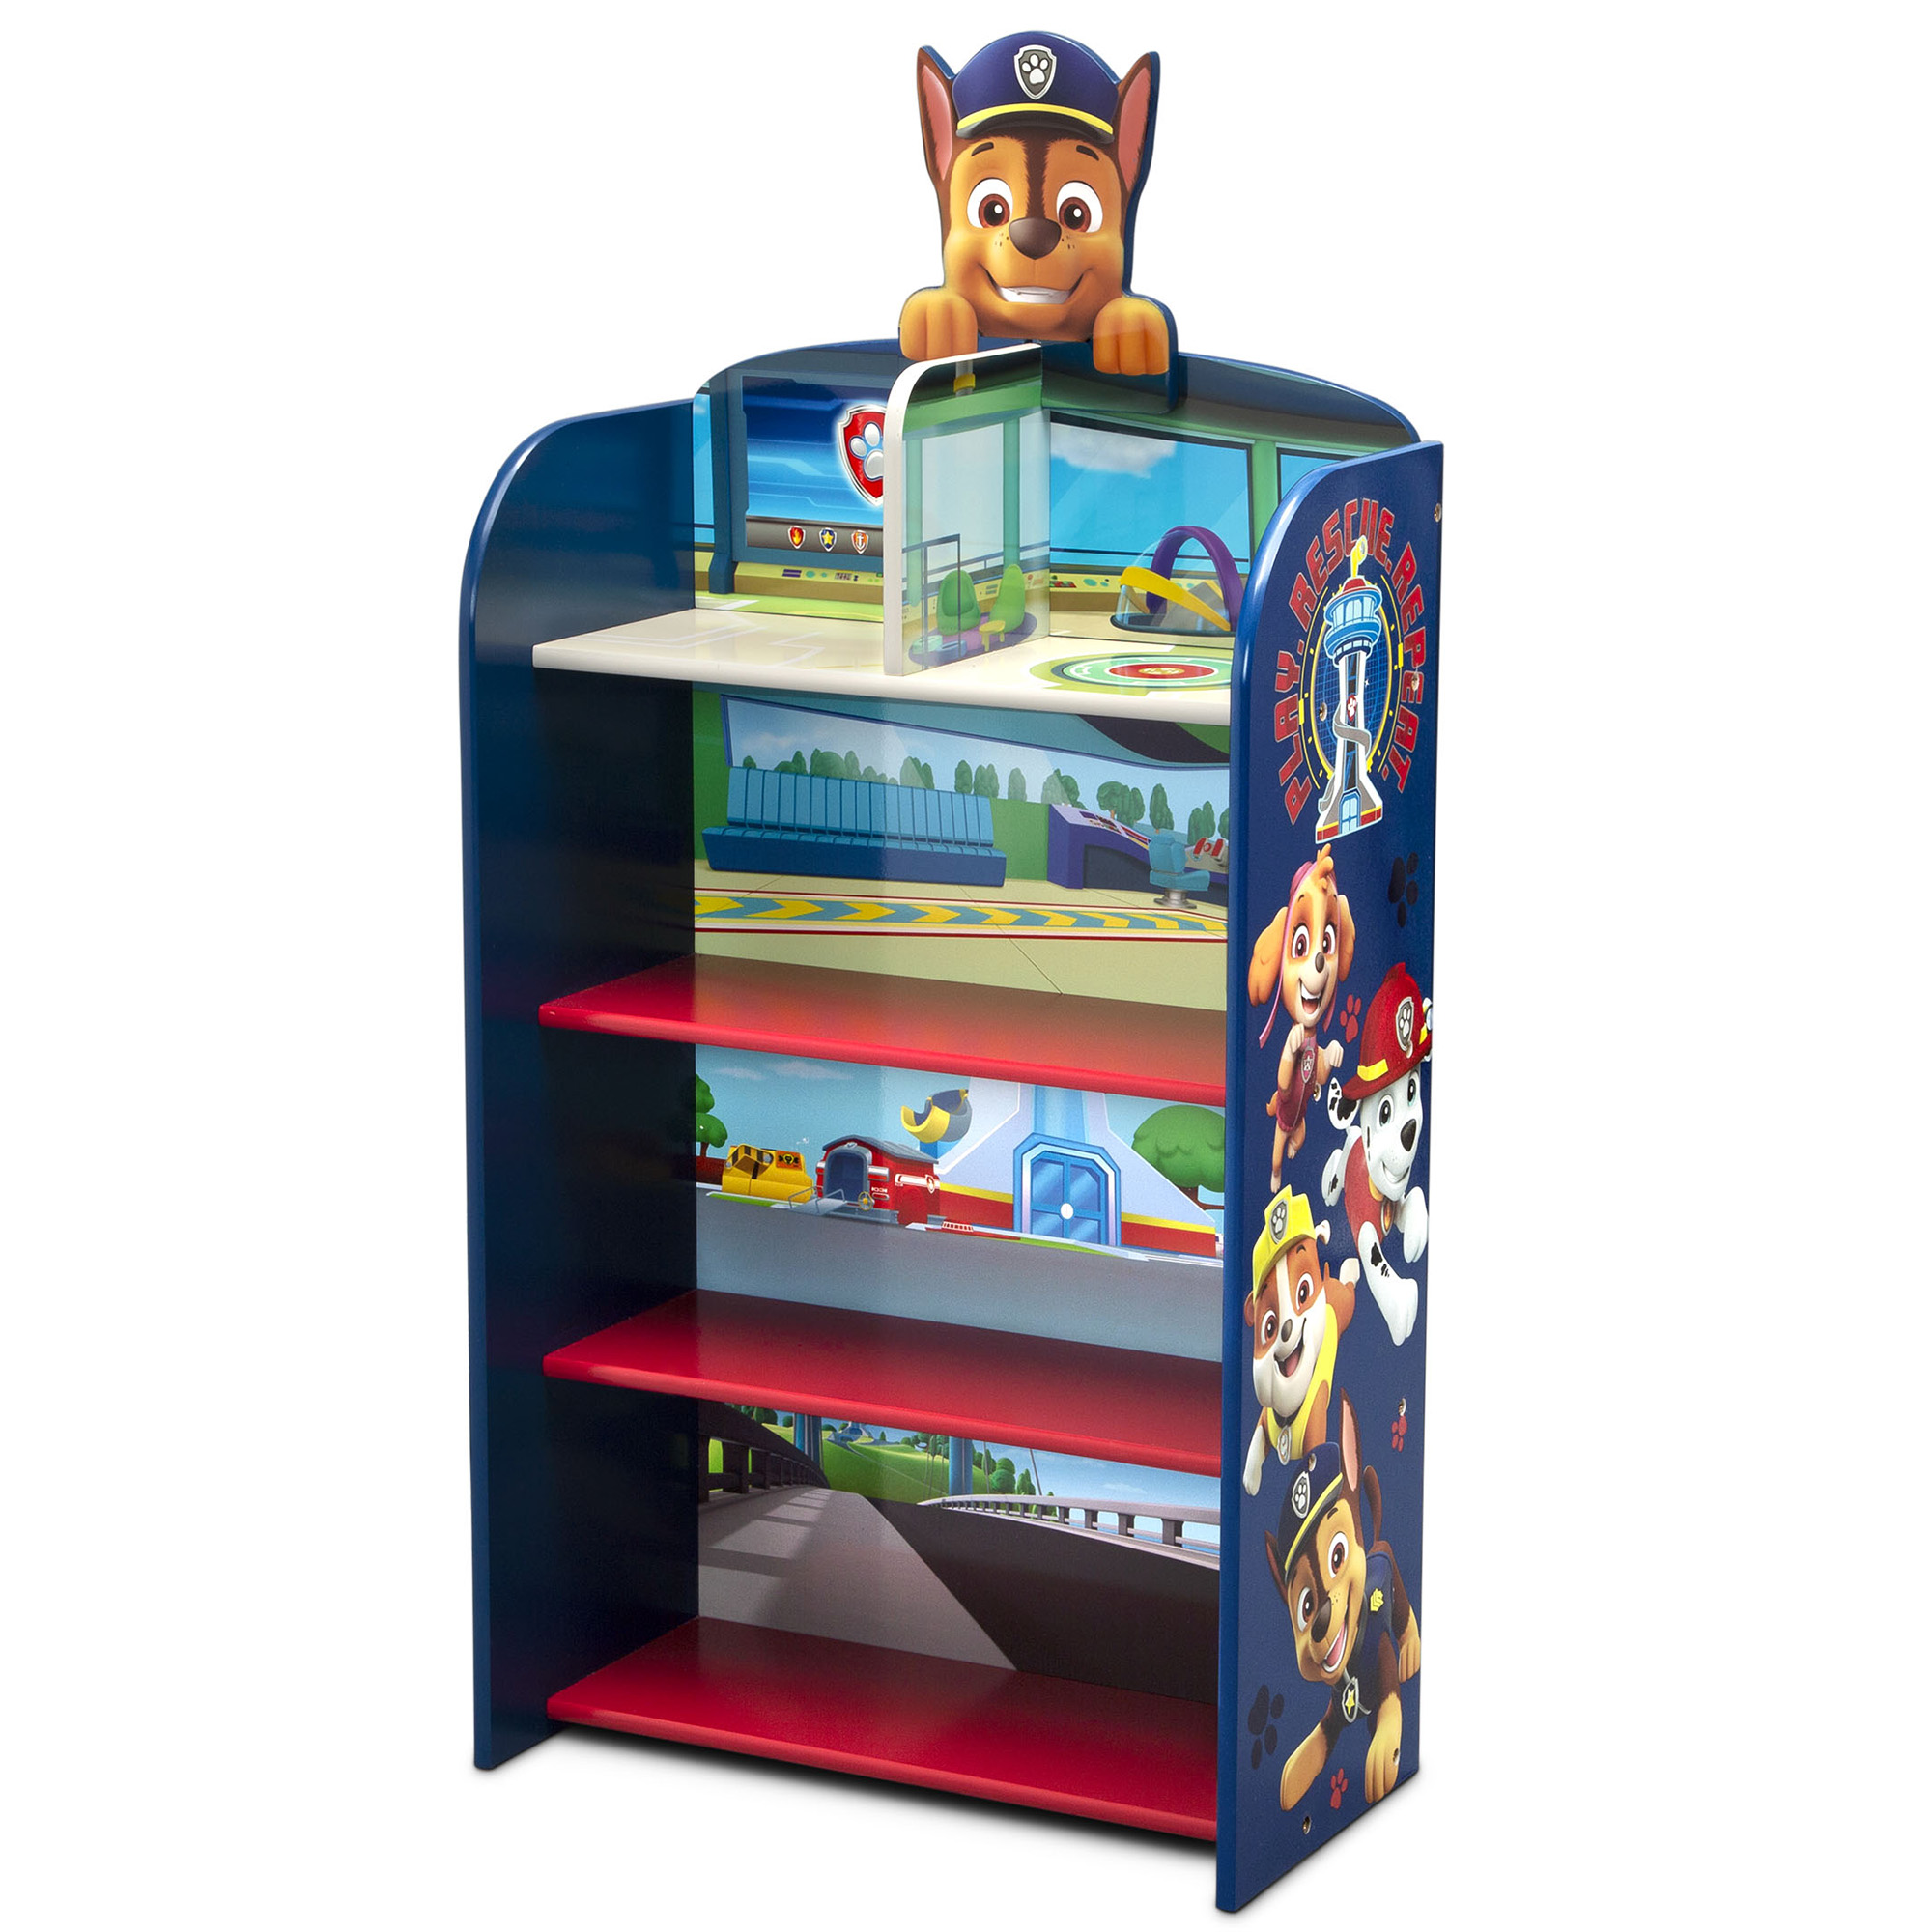 Nick Jr. PAW Patrol Wooden Playhouse 4-Shelf Bookcase for Kids by Delta Children, Greenguard Gold Certified - image 4 of 11